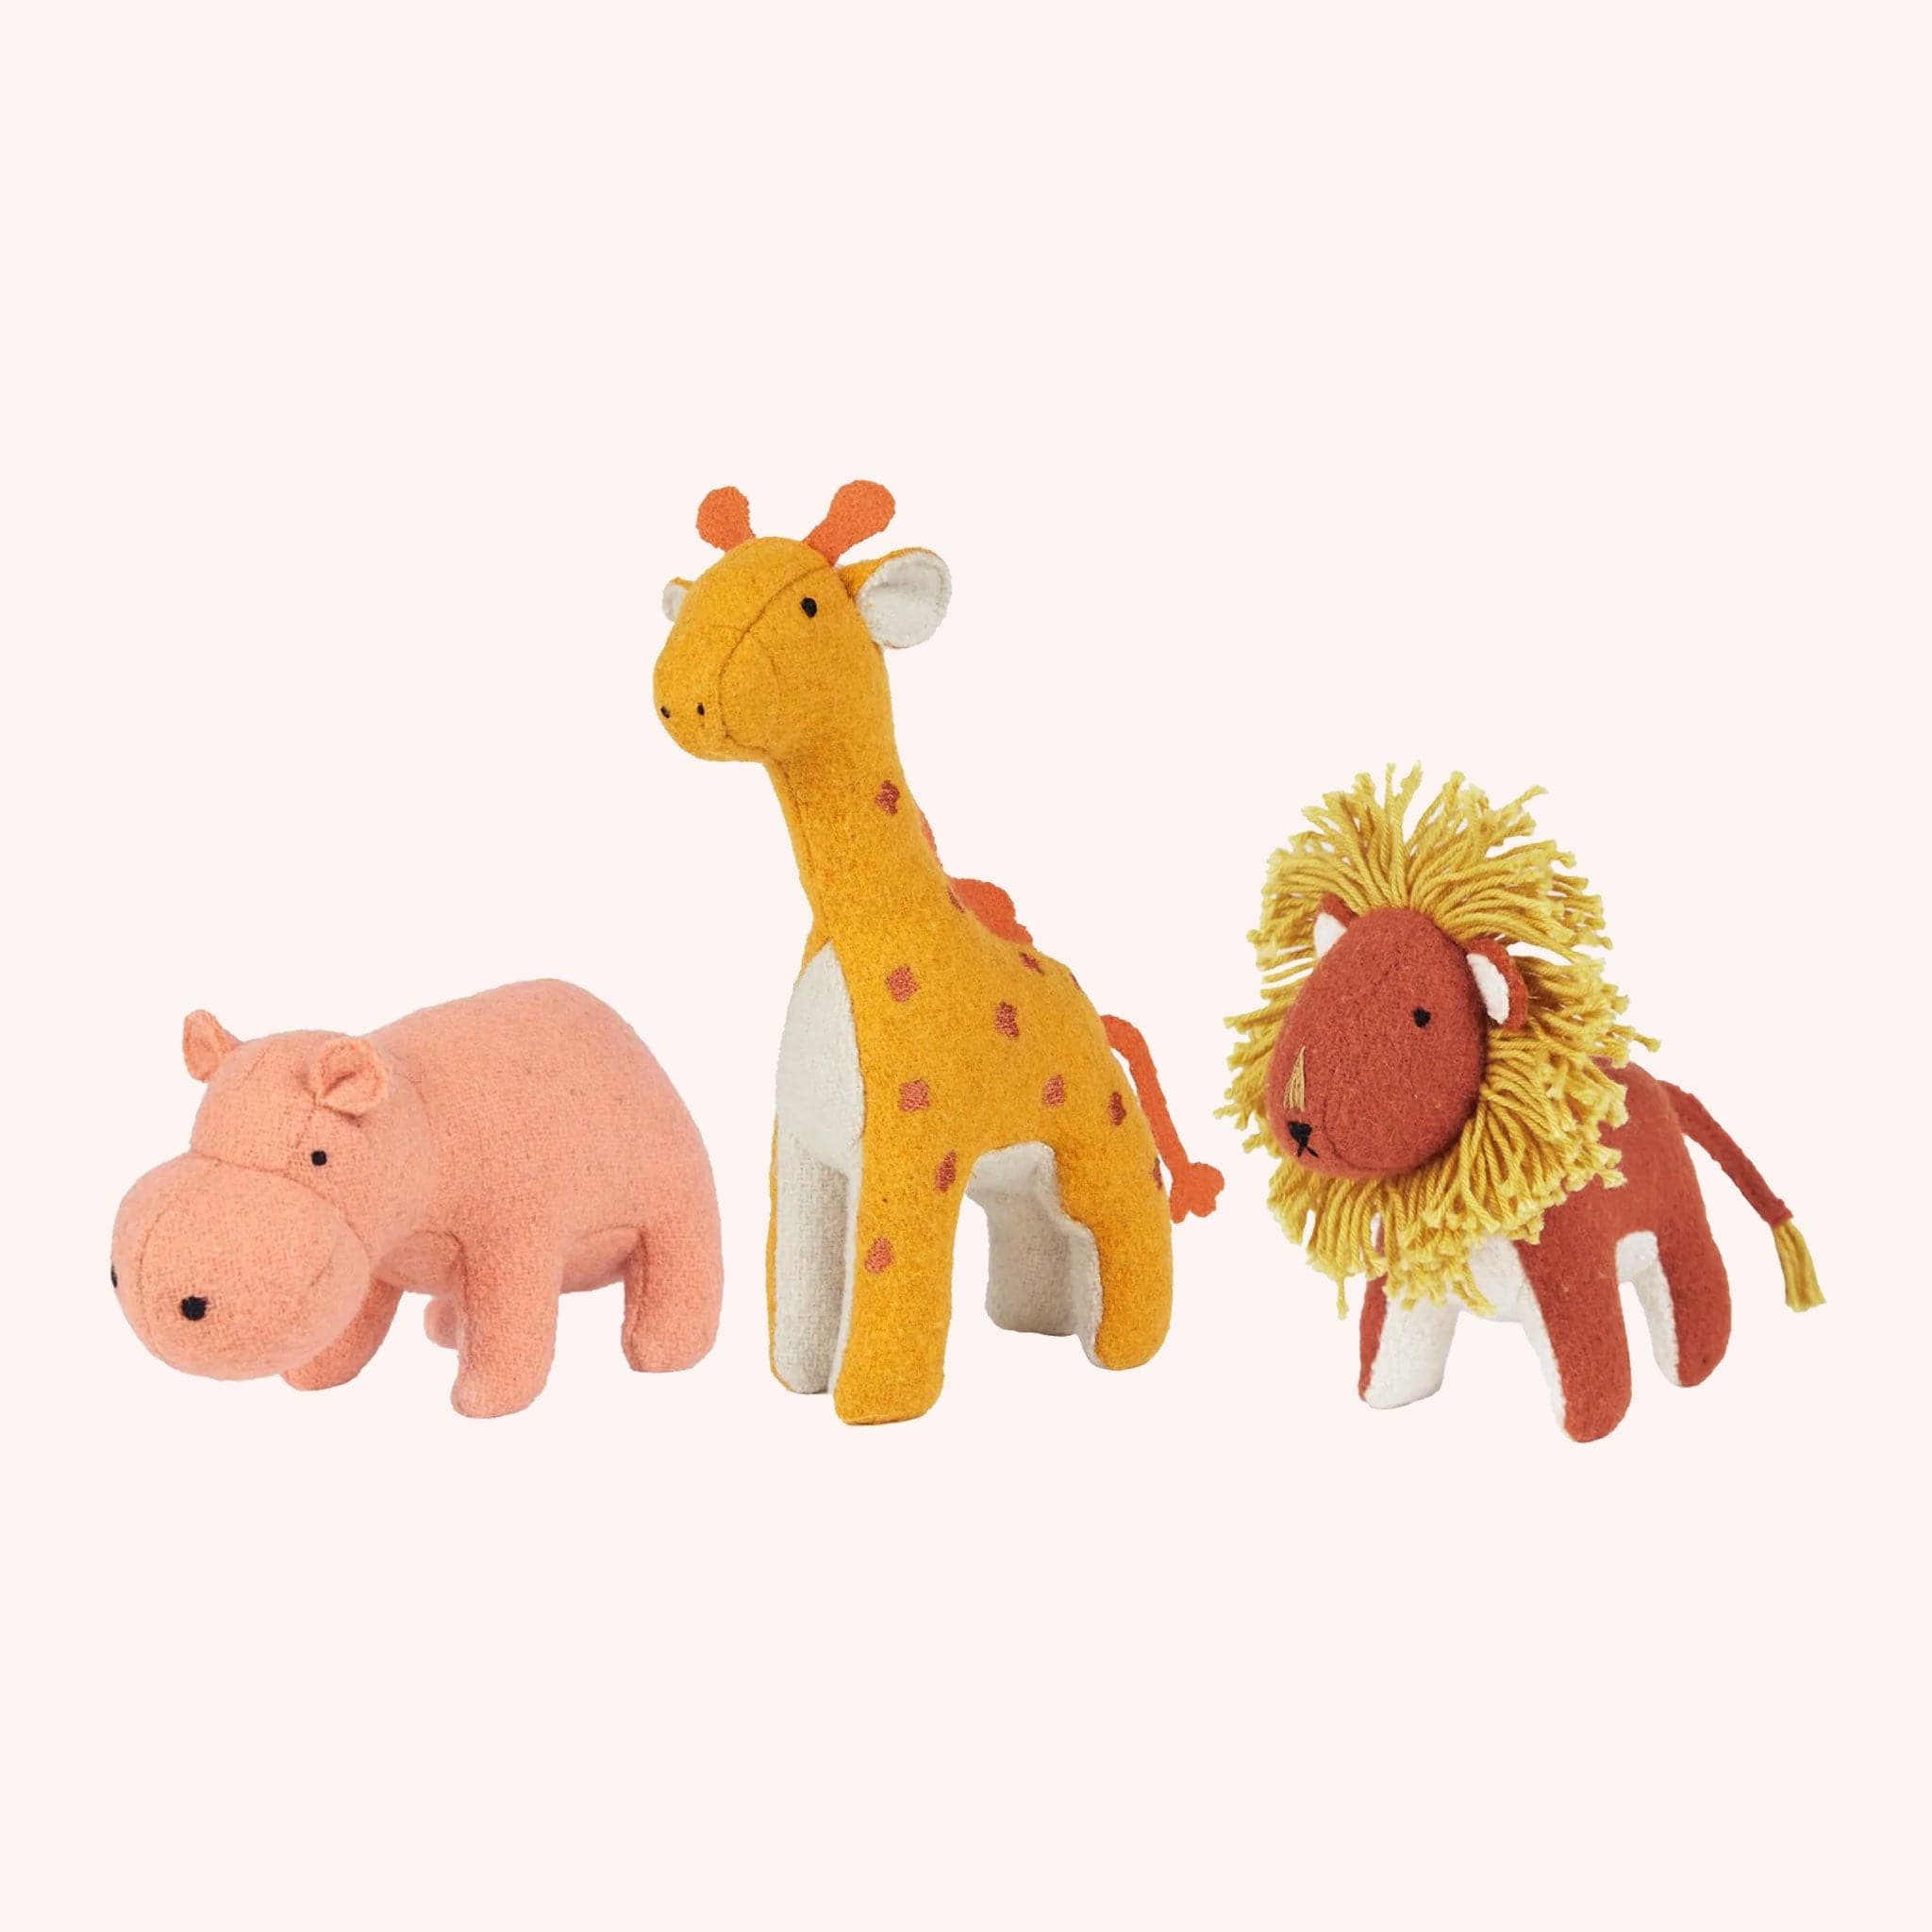 A stuffed animal set inspired by the Savannah. It includes a pink hippo, a red lion with a yellow mane, and a mustard yellow giraffe with orange spots and an orange tail.